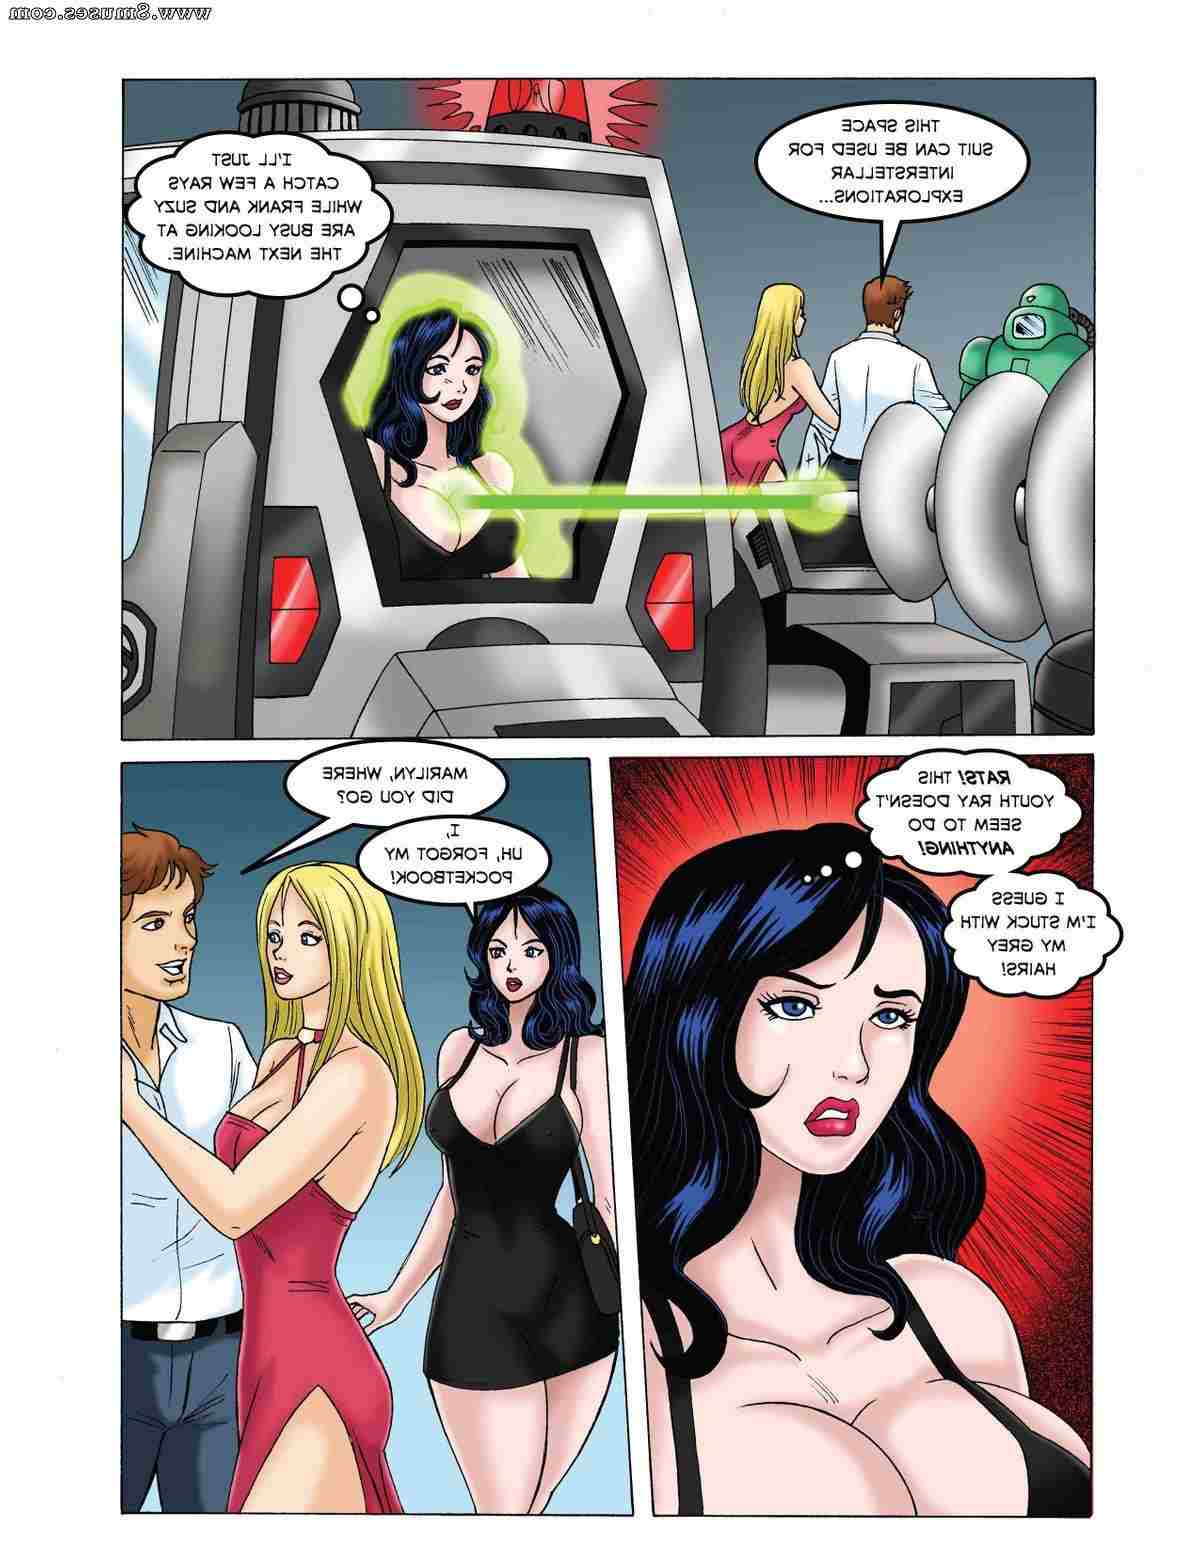 DreamTales-Comics/Crybaby-Marilyn Crybaby_Marilyn__8muses_-_Sex_and_Porn_Comics_7.jpg